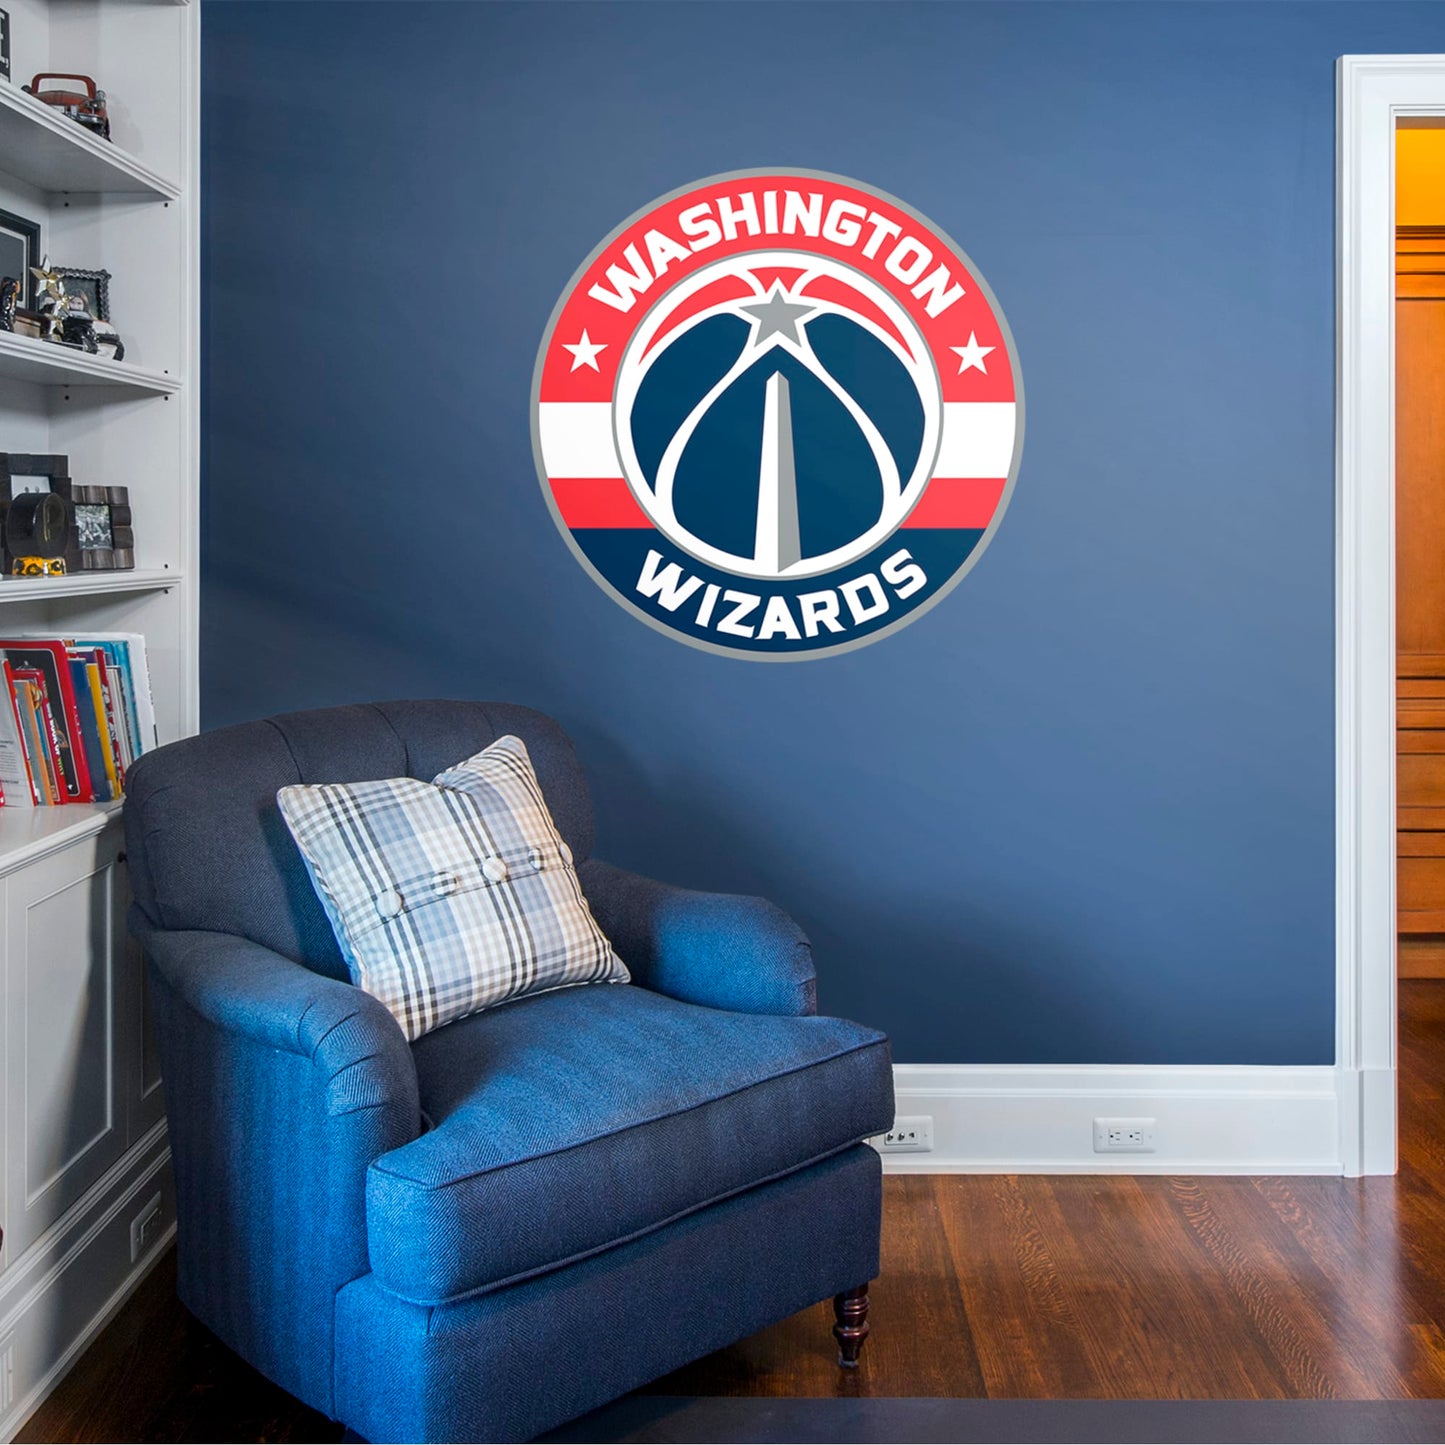 Washington Wizards: Logo - Officially Licensed NBA Removable Wall Decal